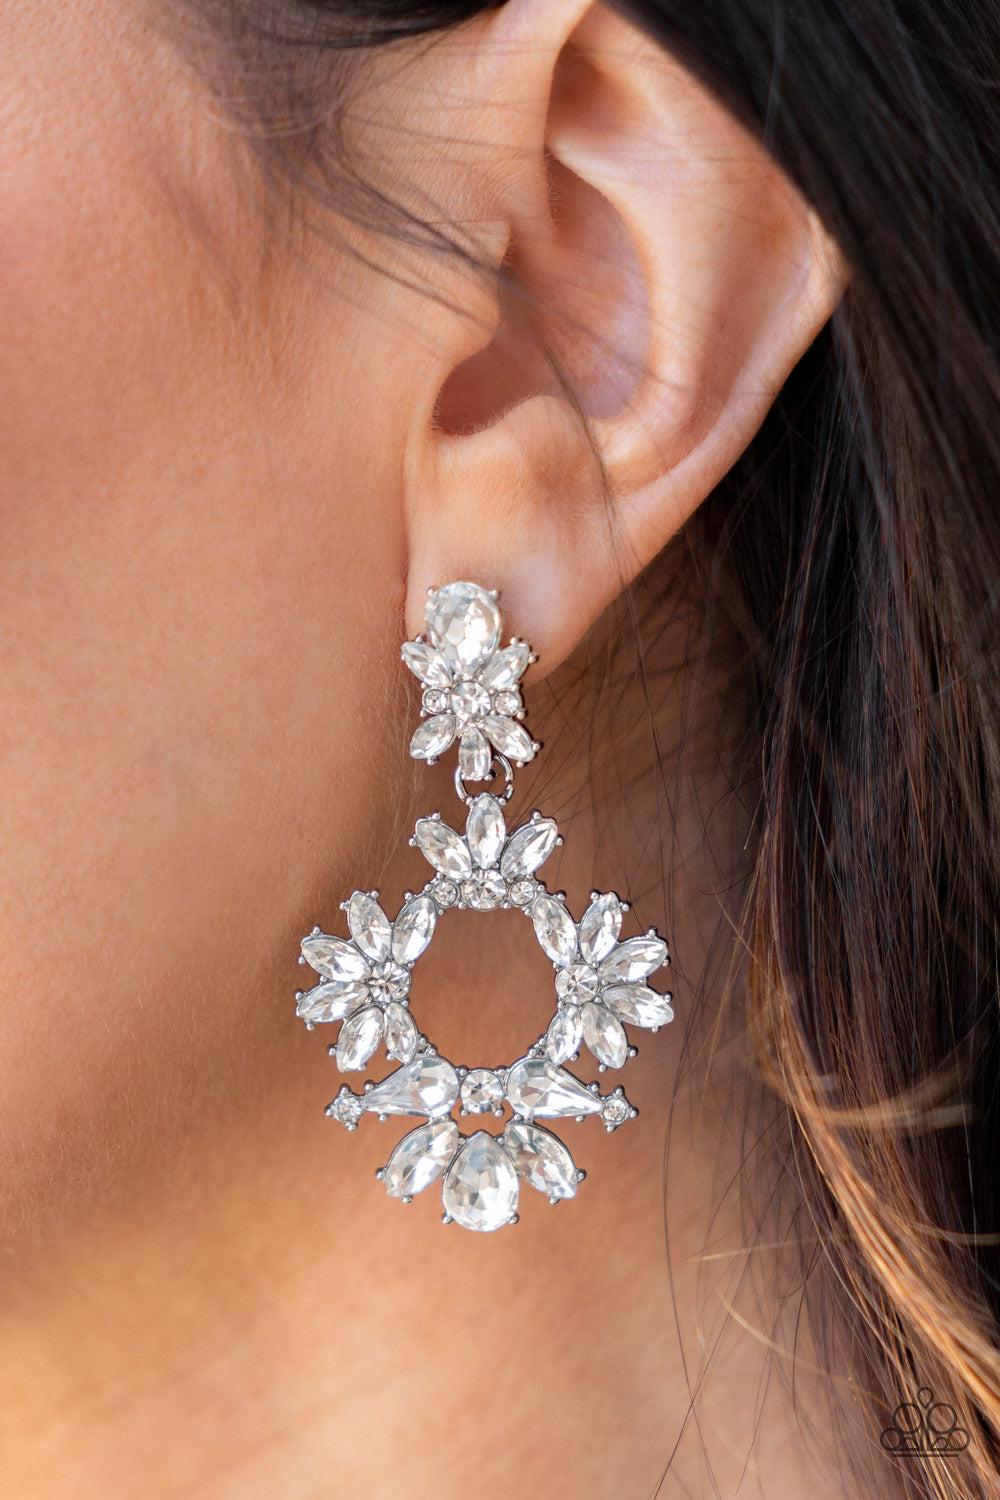 Leave Them Speechless White Rhinestone Earrings - Paparazzi Accessories-on model - CarasShop.com - $5 Jewelry by Cara Jewels